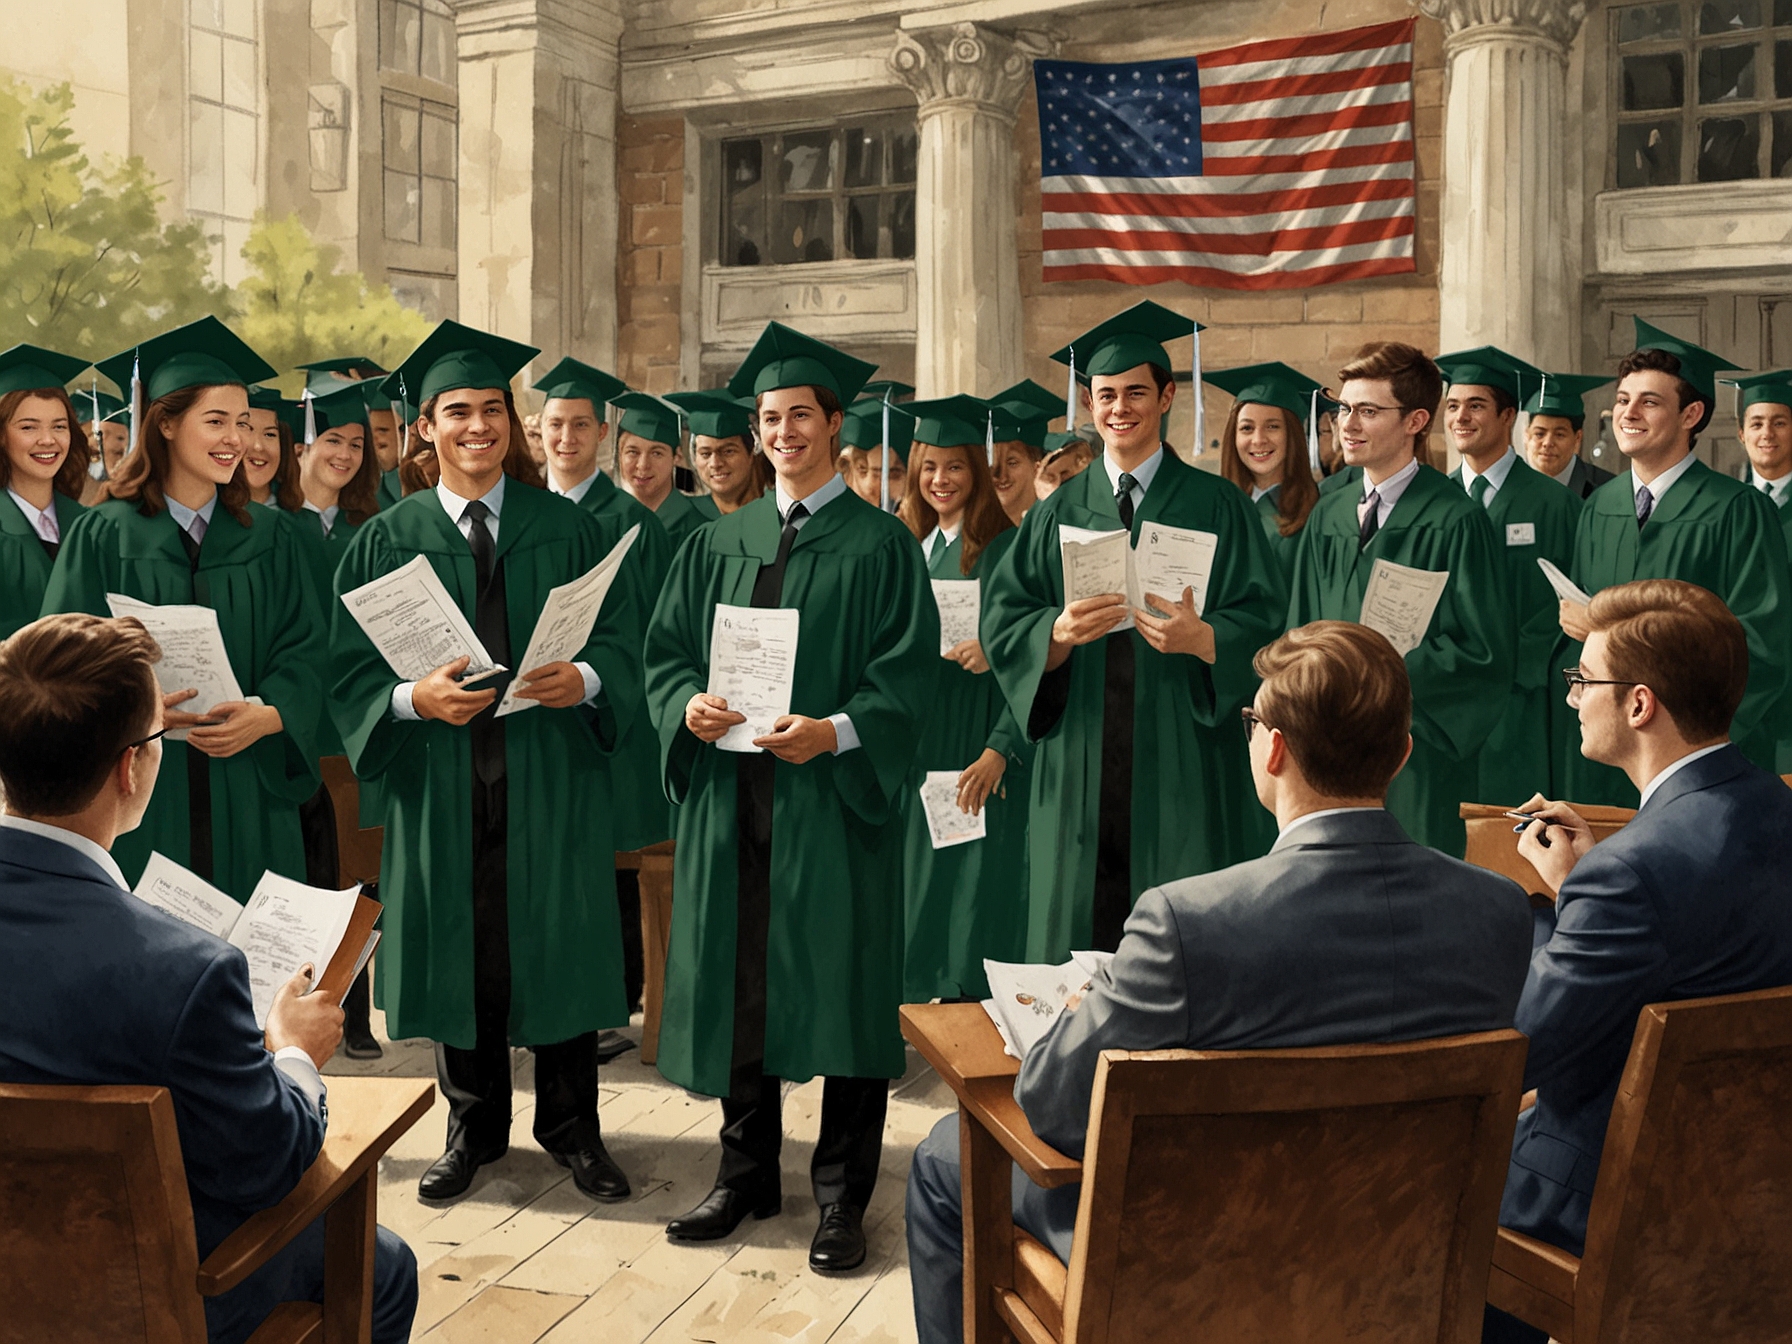 An illustration of international graduates from American colleges receiving green cards, symbolizing Trump's proposal for retaining skilled foreign talent in the U.S.